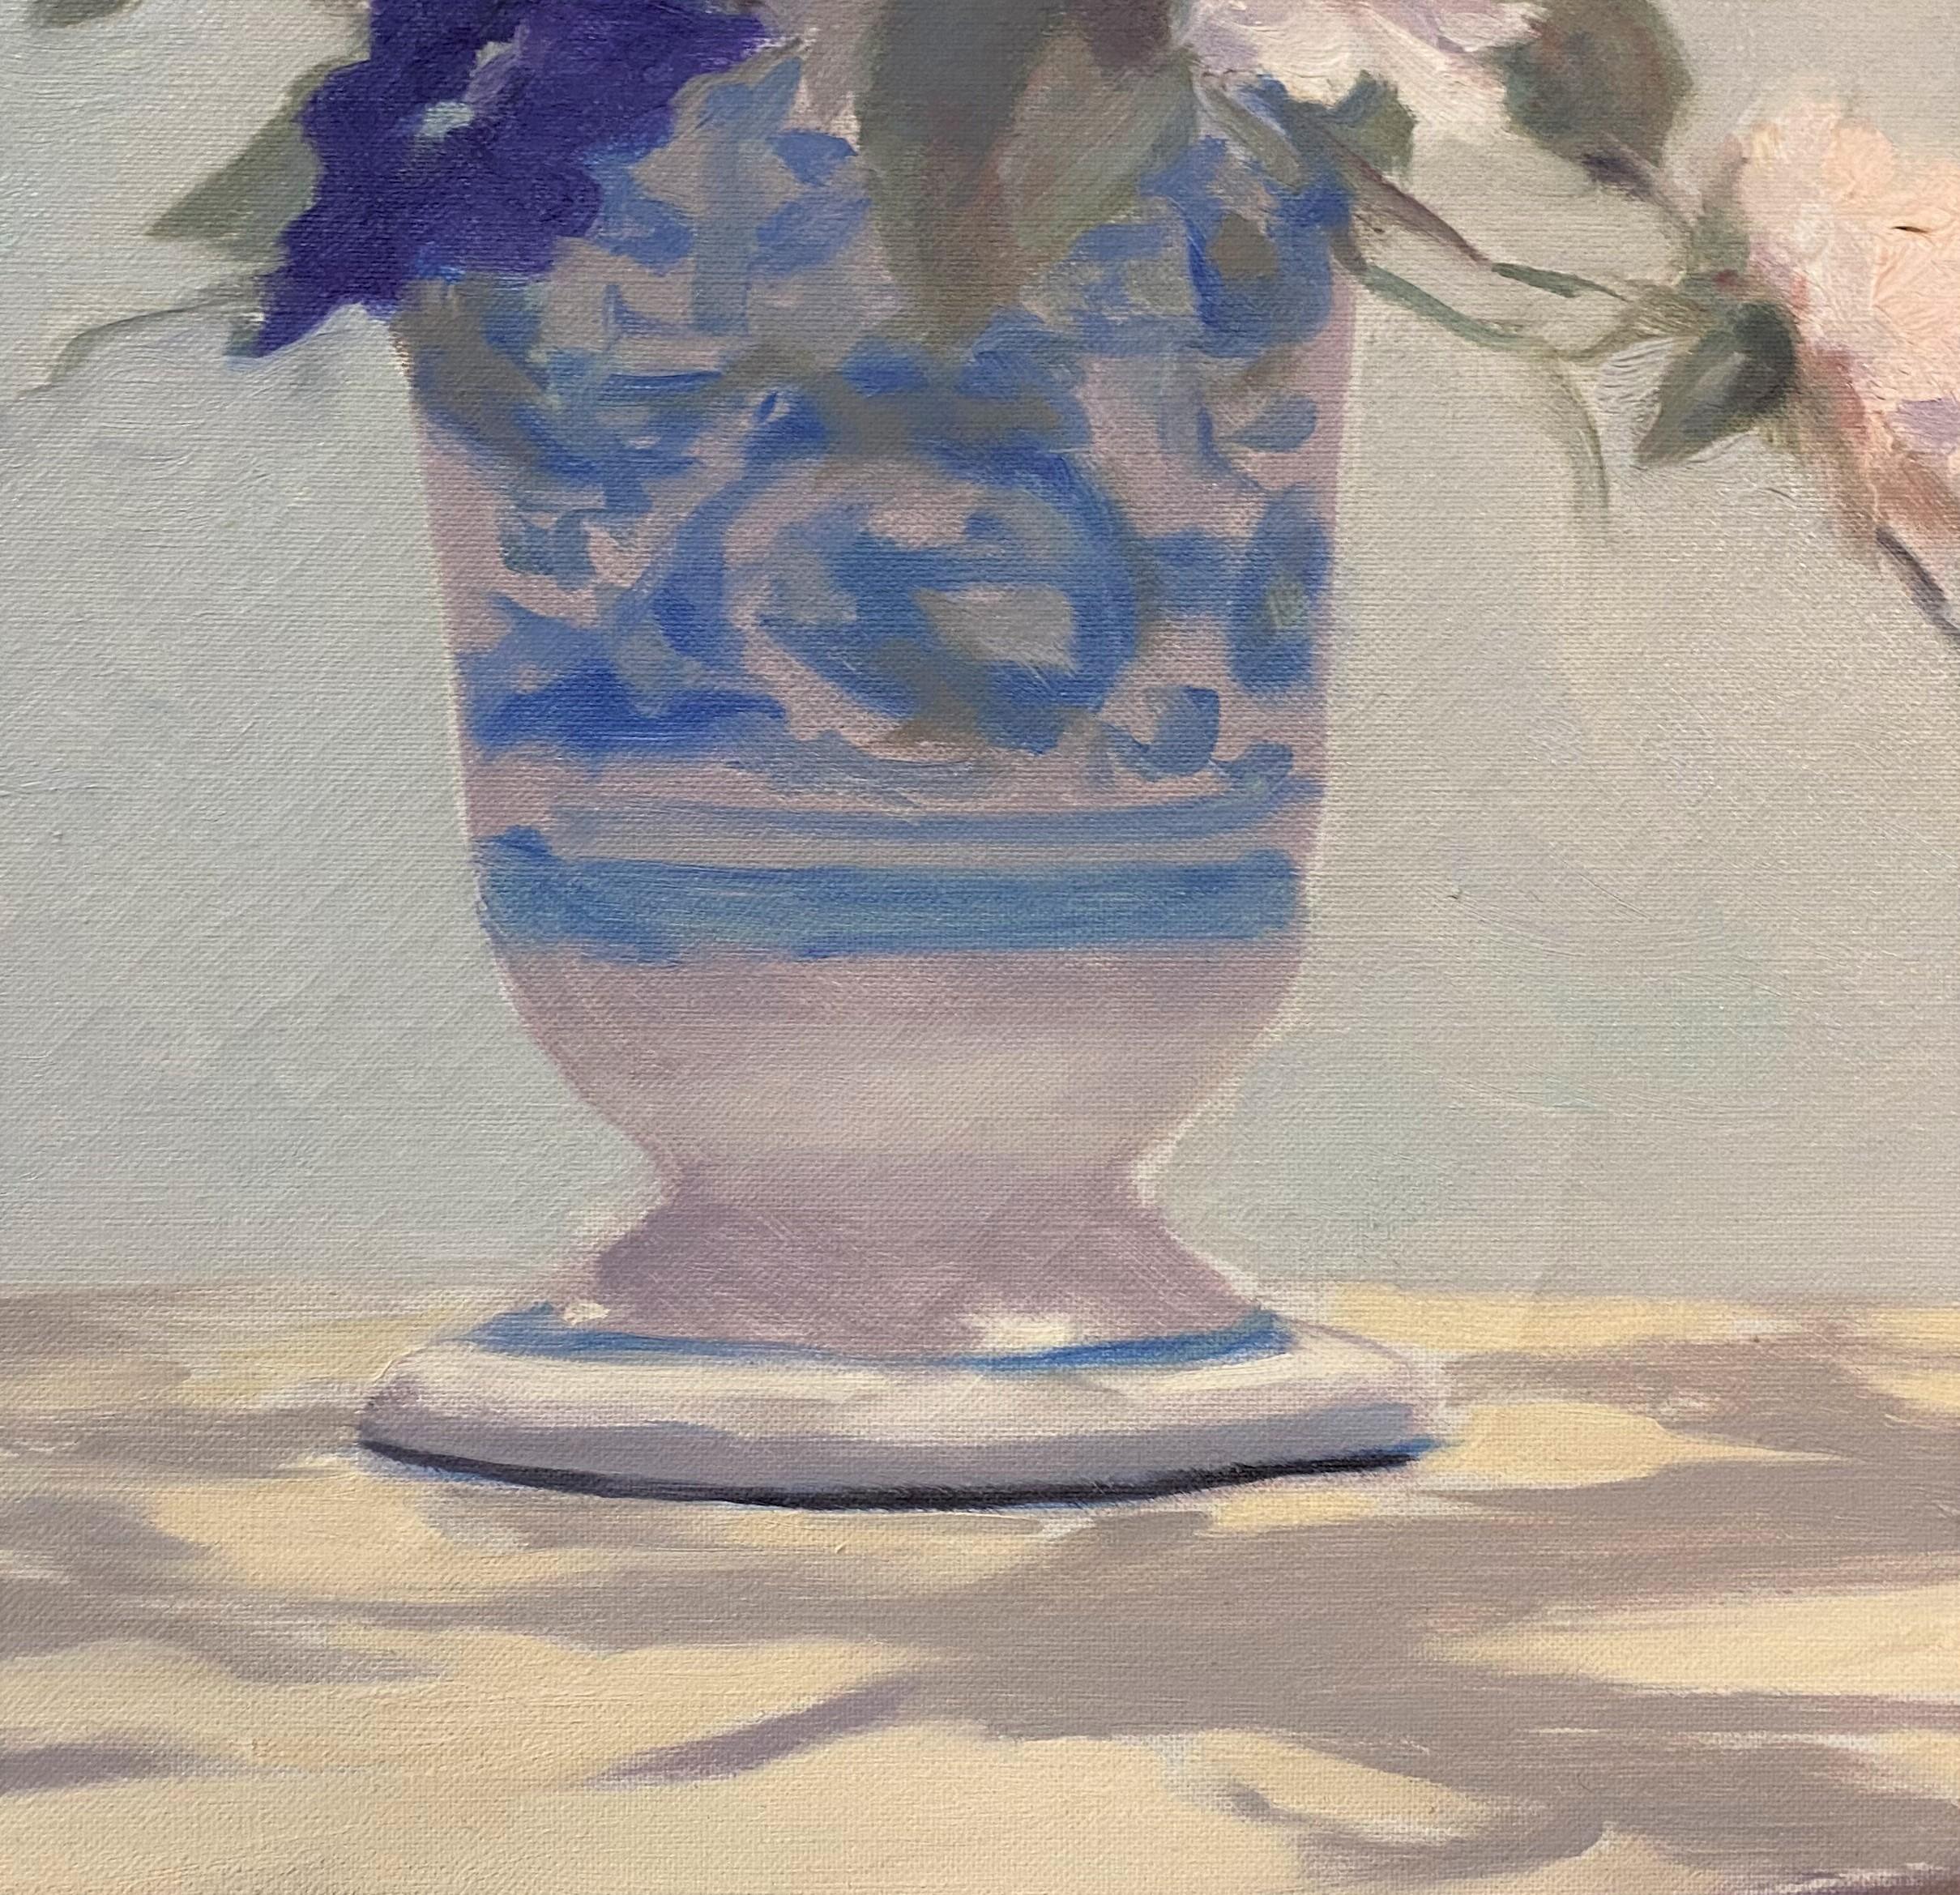 A nicely executed still life oil painting of flowers in a blue & white vase by André (Gittleson) Gisson (1921-2003). Gisson, born Anders Gittleson in Brooklyn, NY, graduated from the Pratt Institute and was a captain in the Army during World War II.